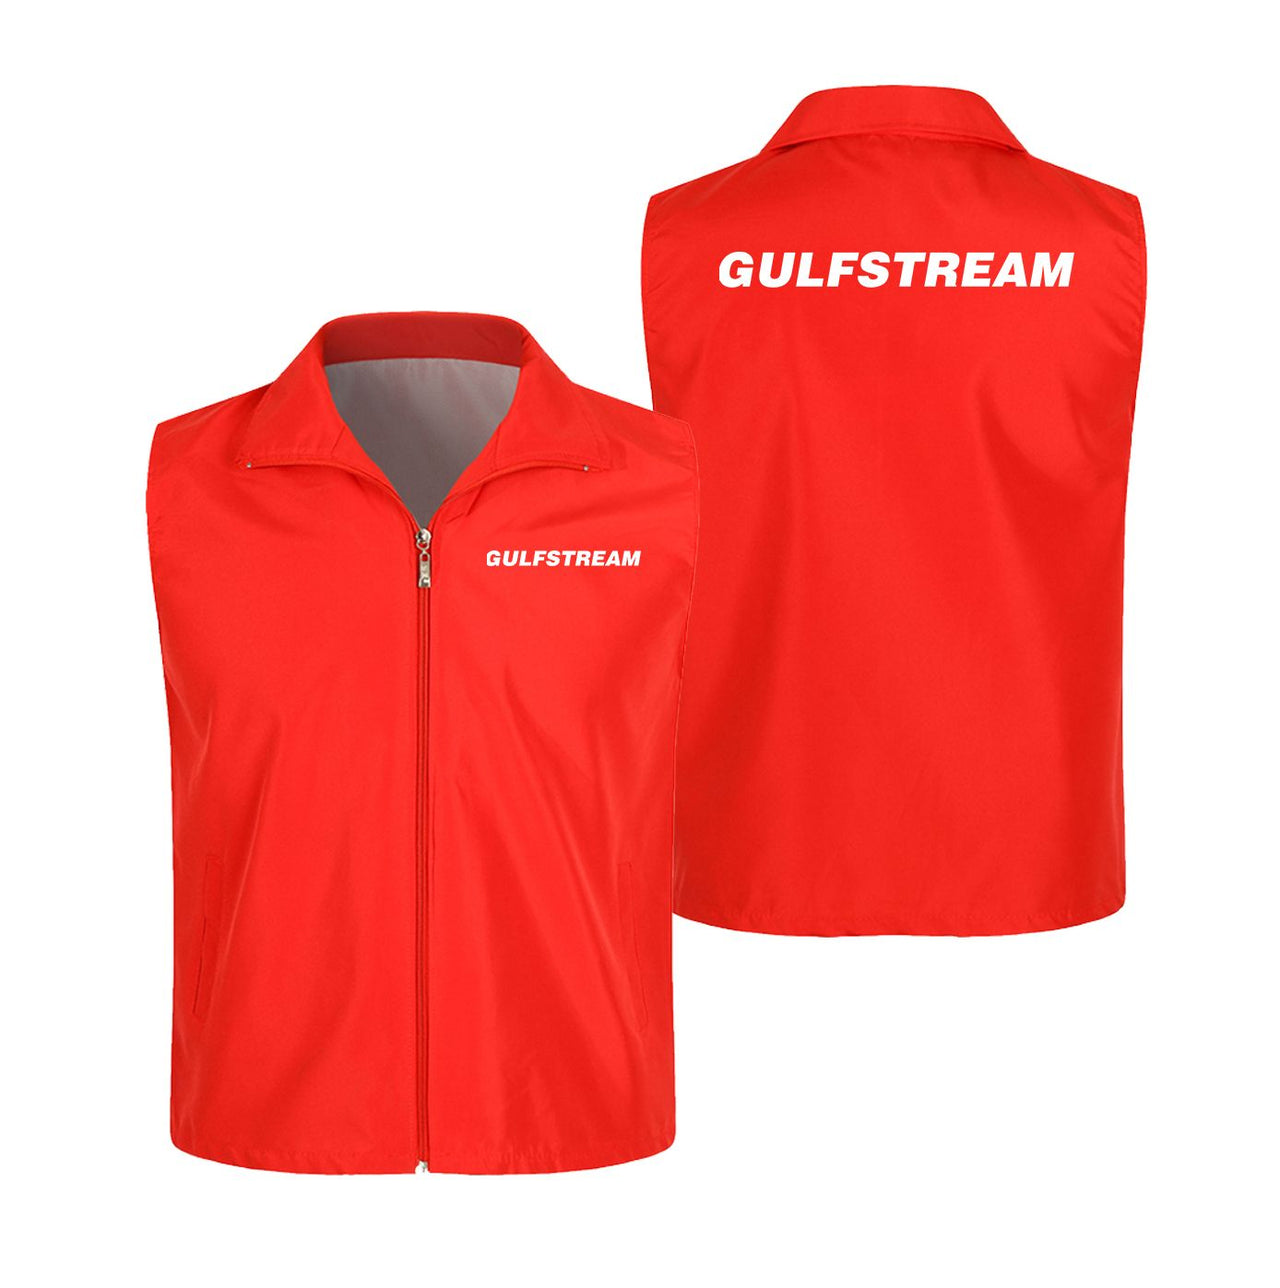 Gulfstream & Text Designed Thin Style Vests